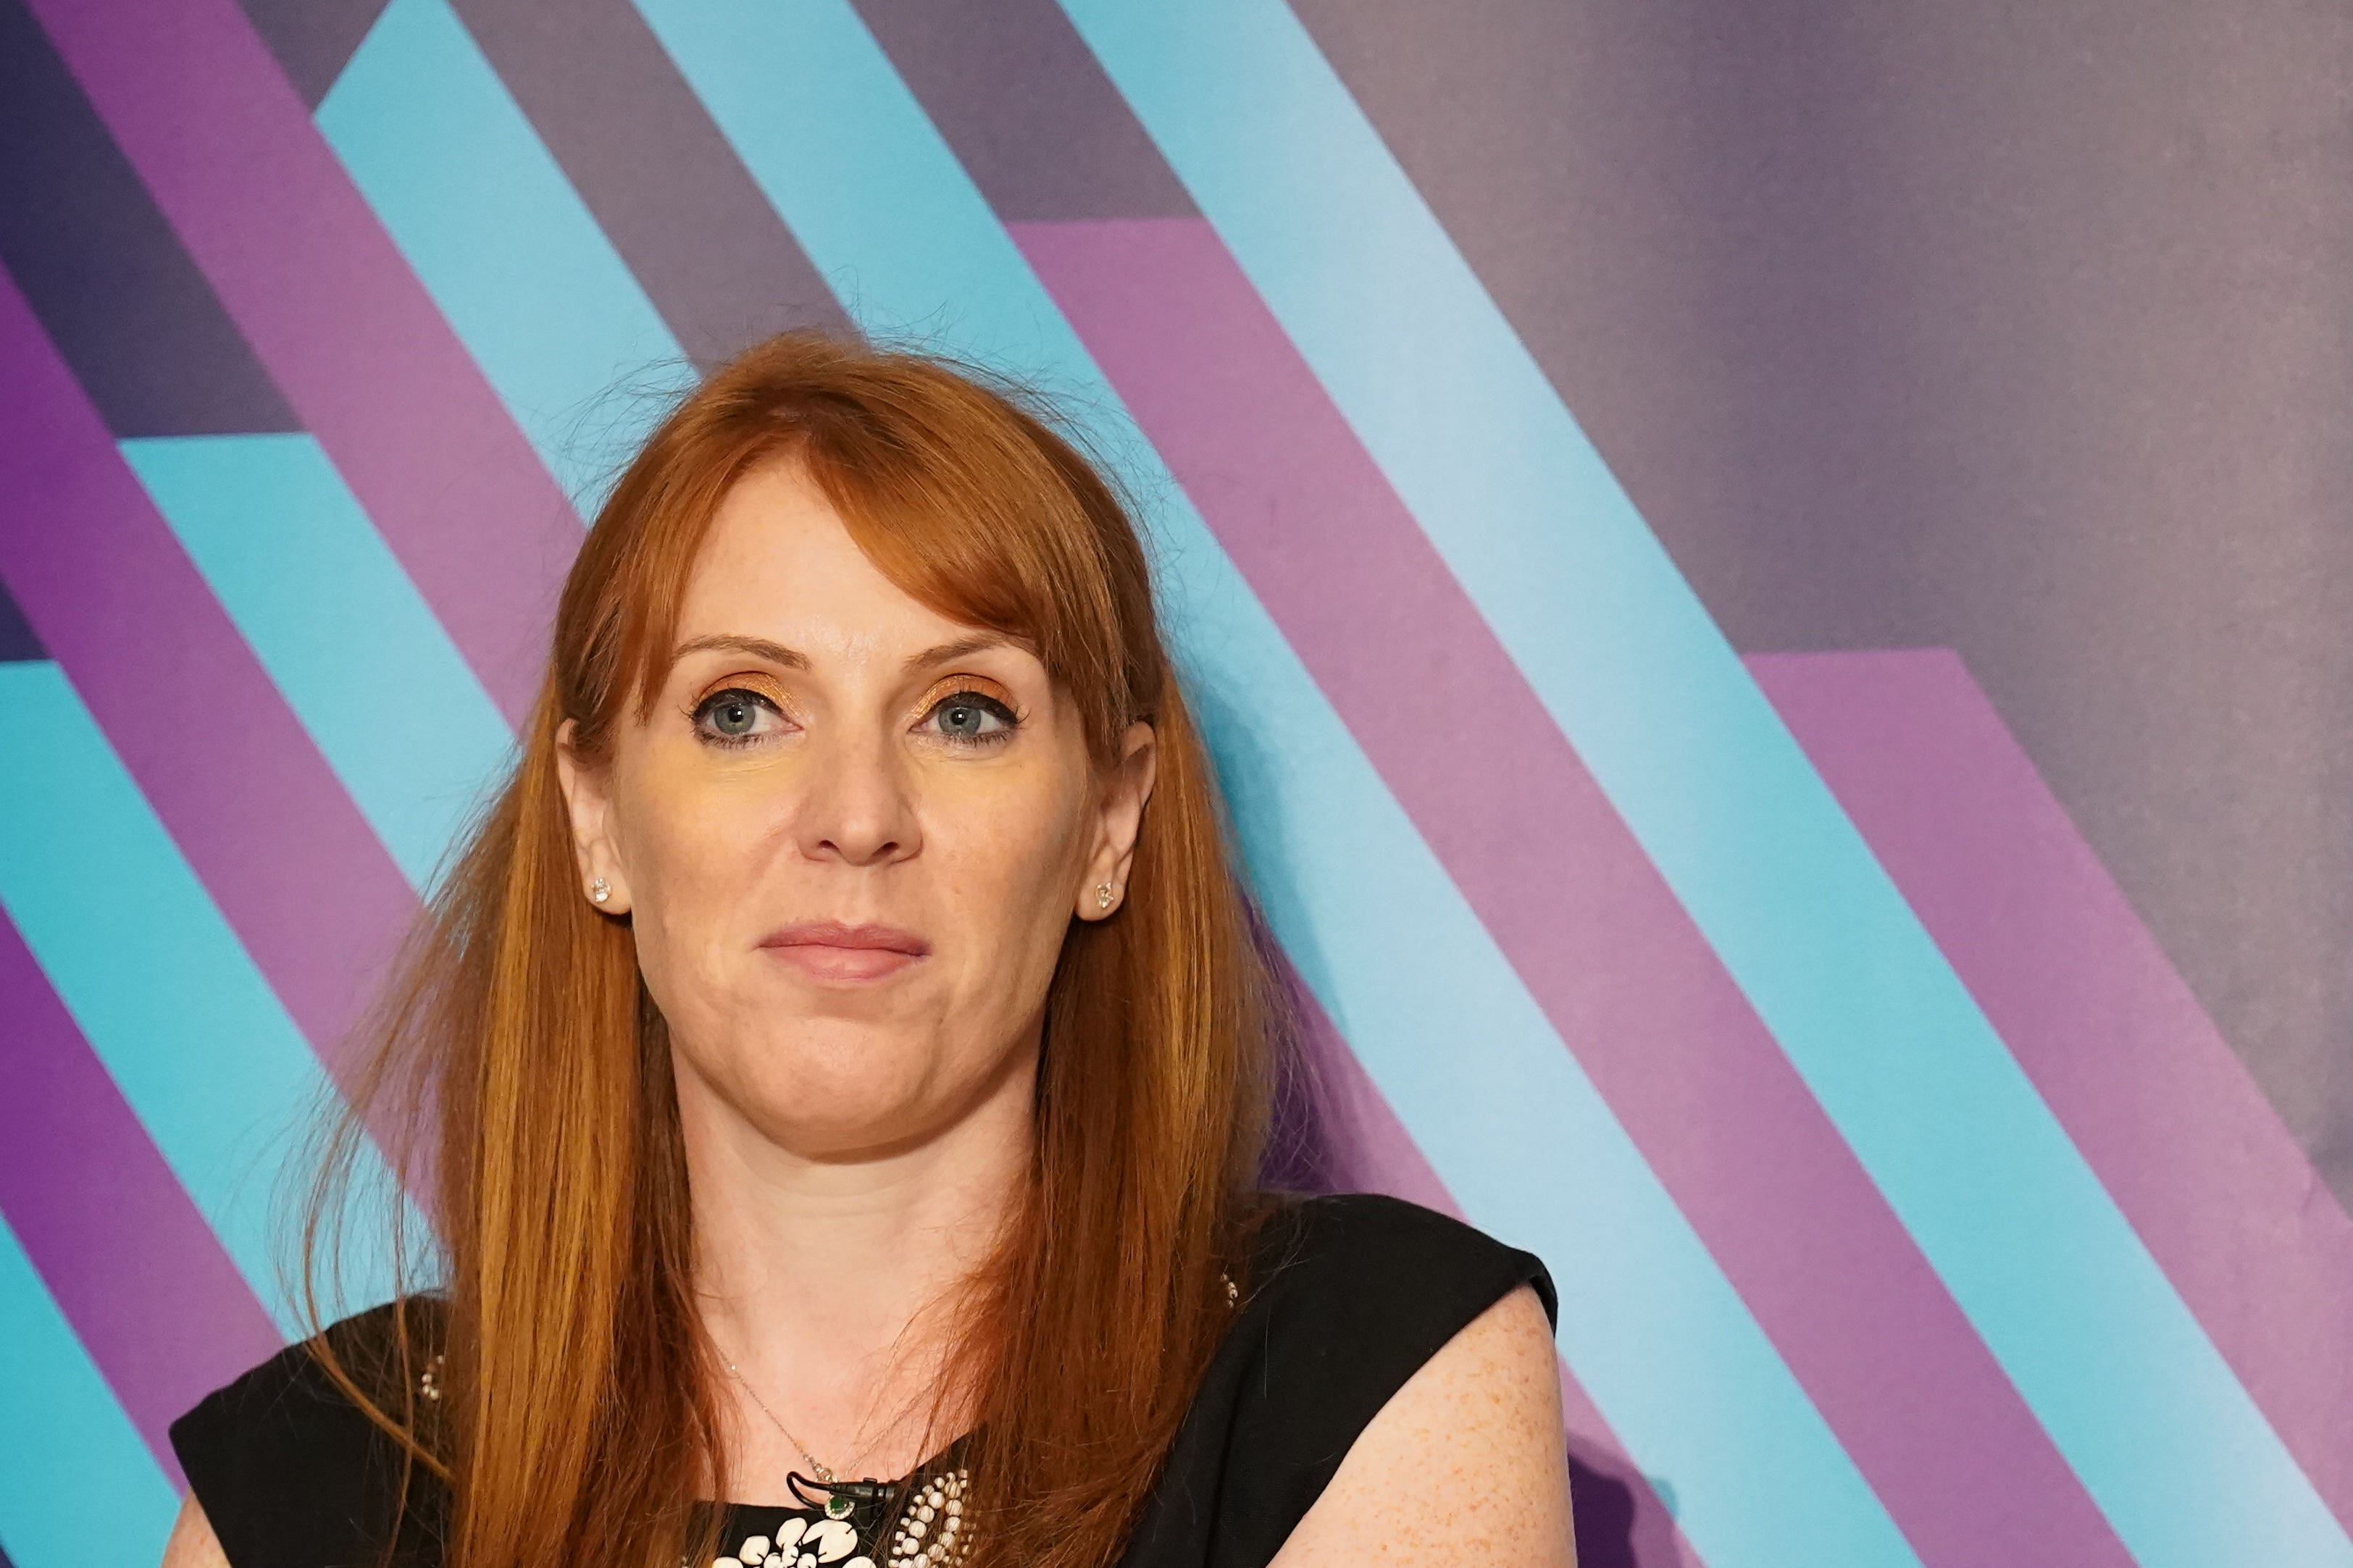 Labour‘s deputy leader Angela Rayner has claimed more than ?4,000 for utilities at her London home in the past four years